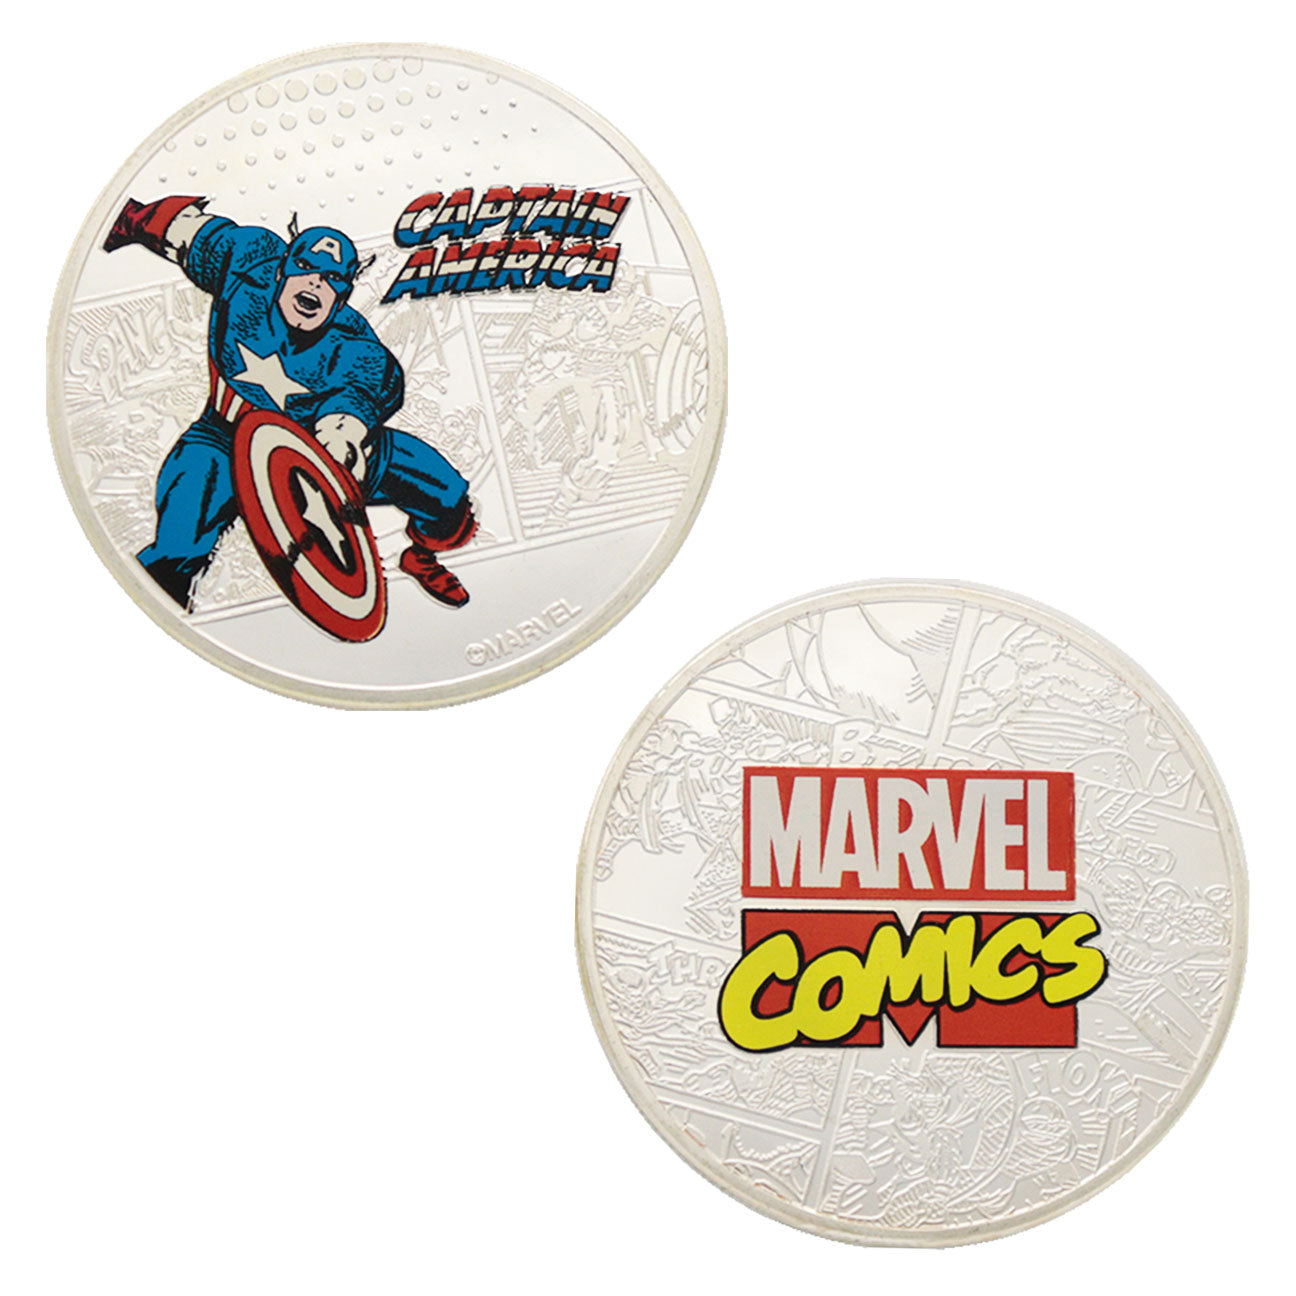 Marvel Limited Edition .999 Silver Plated Captain America Collectible Coin